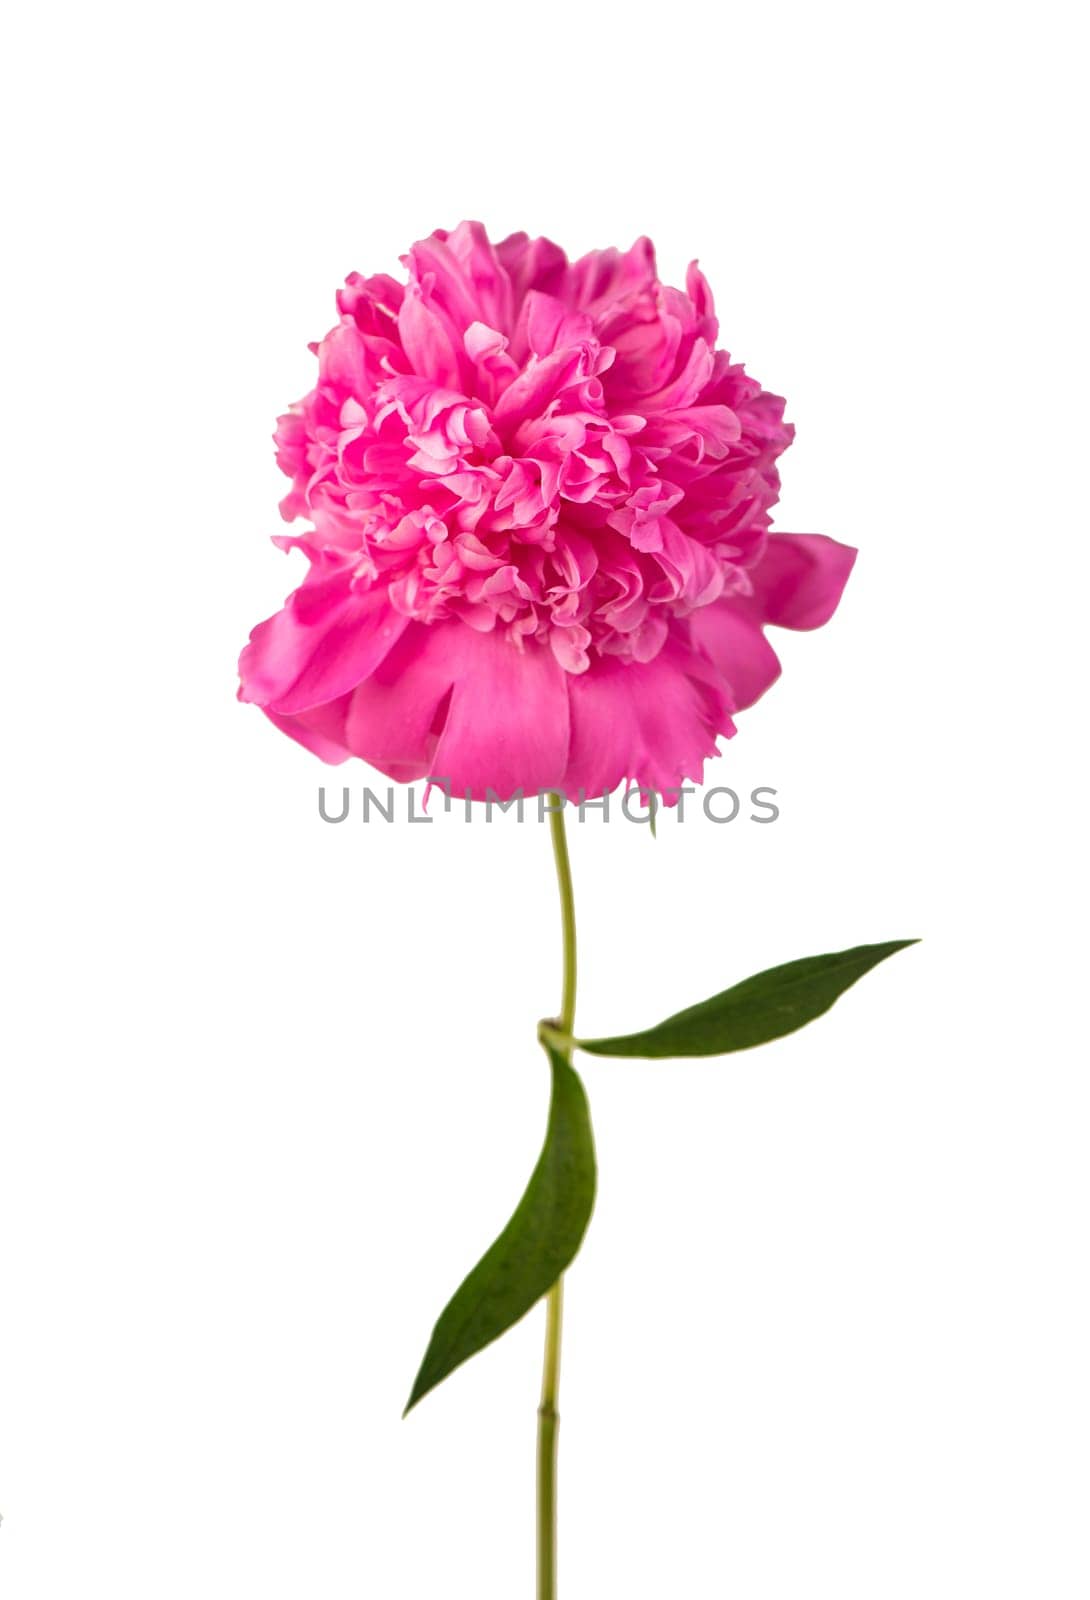 one big beautiful pink peony flower with leaf isolated on white background by aprilphoto